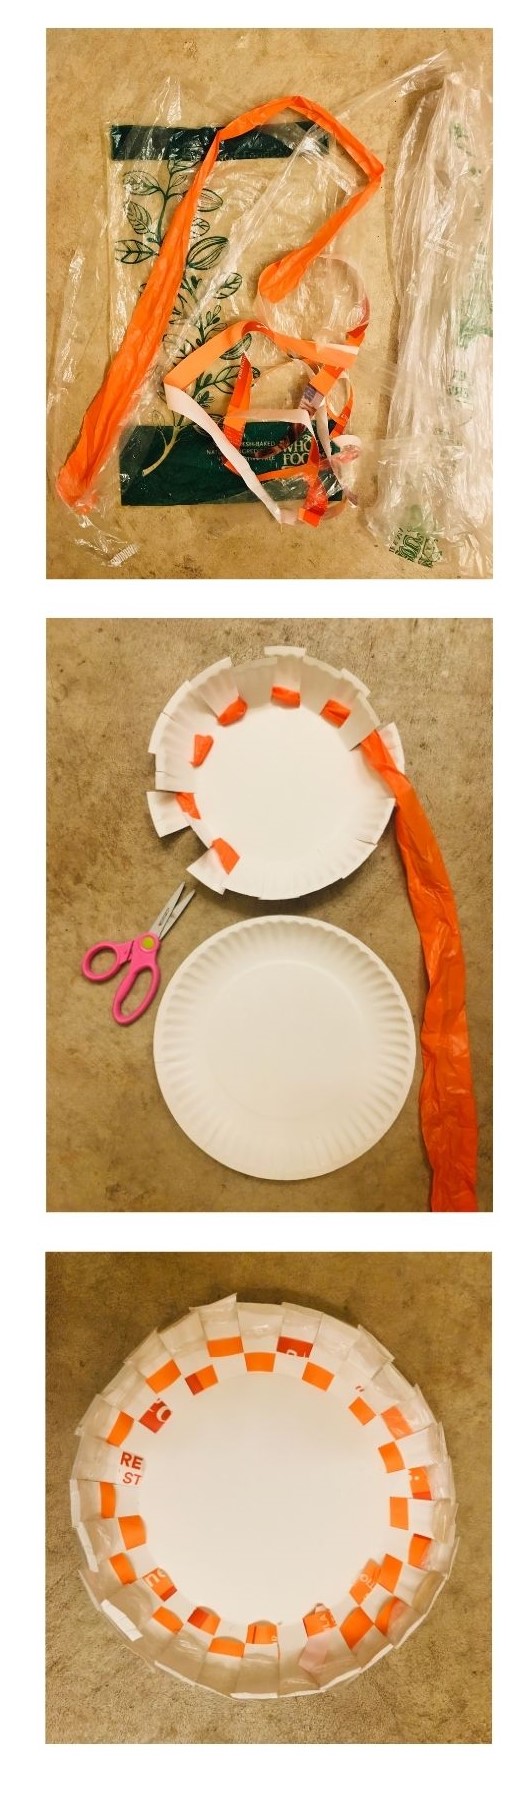 A grouping of images showing the steps of how to weave plastic strips on a paper plate to make a basket.      